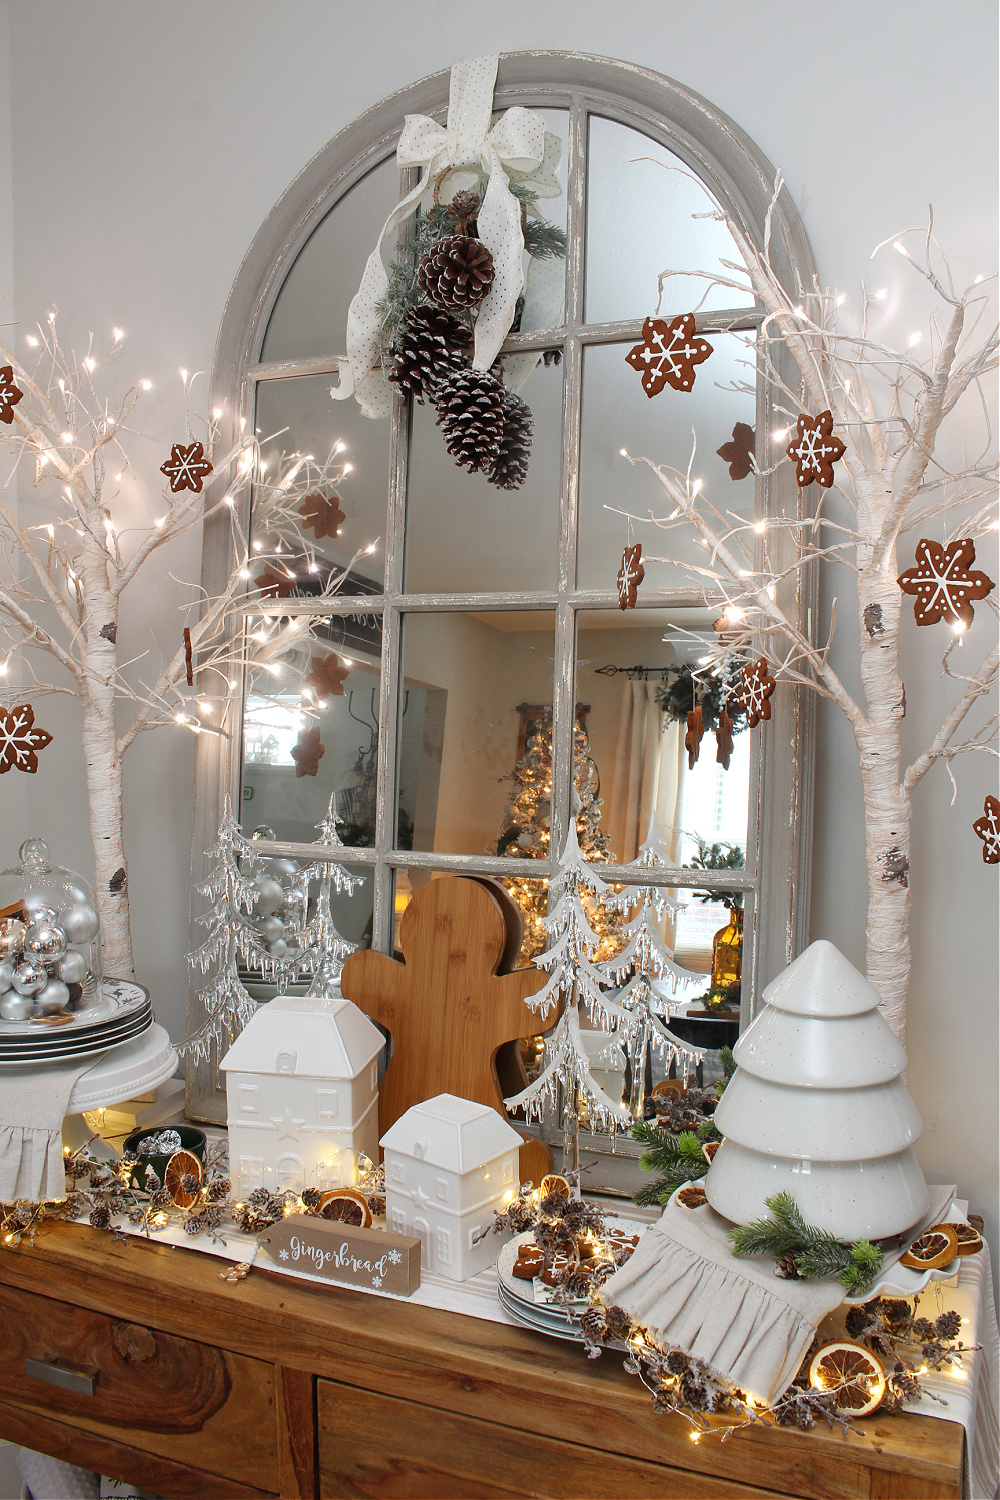 A Christmas sideboard inspired by gingerbread.